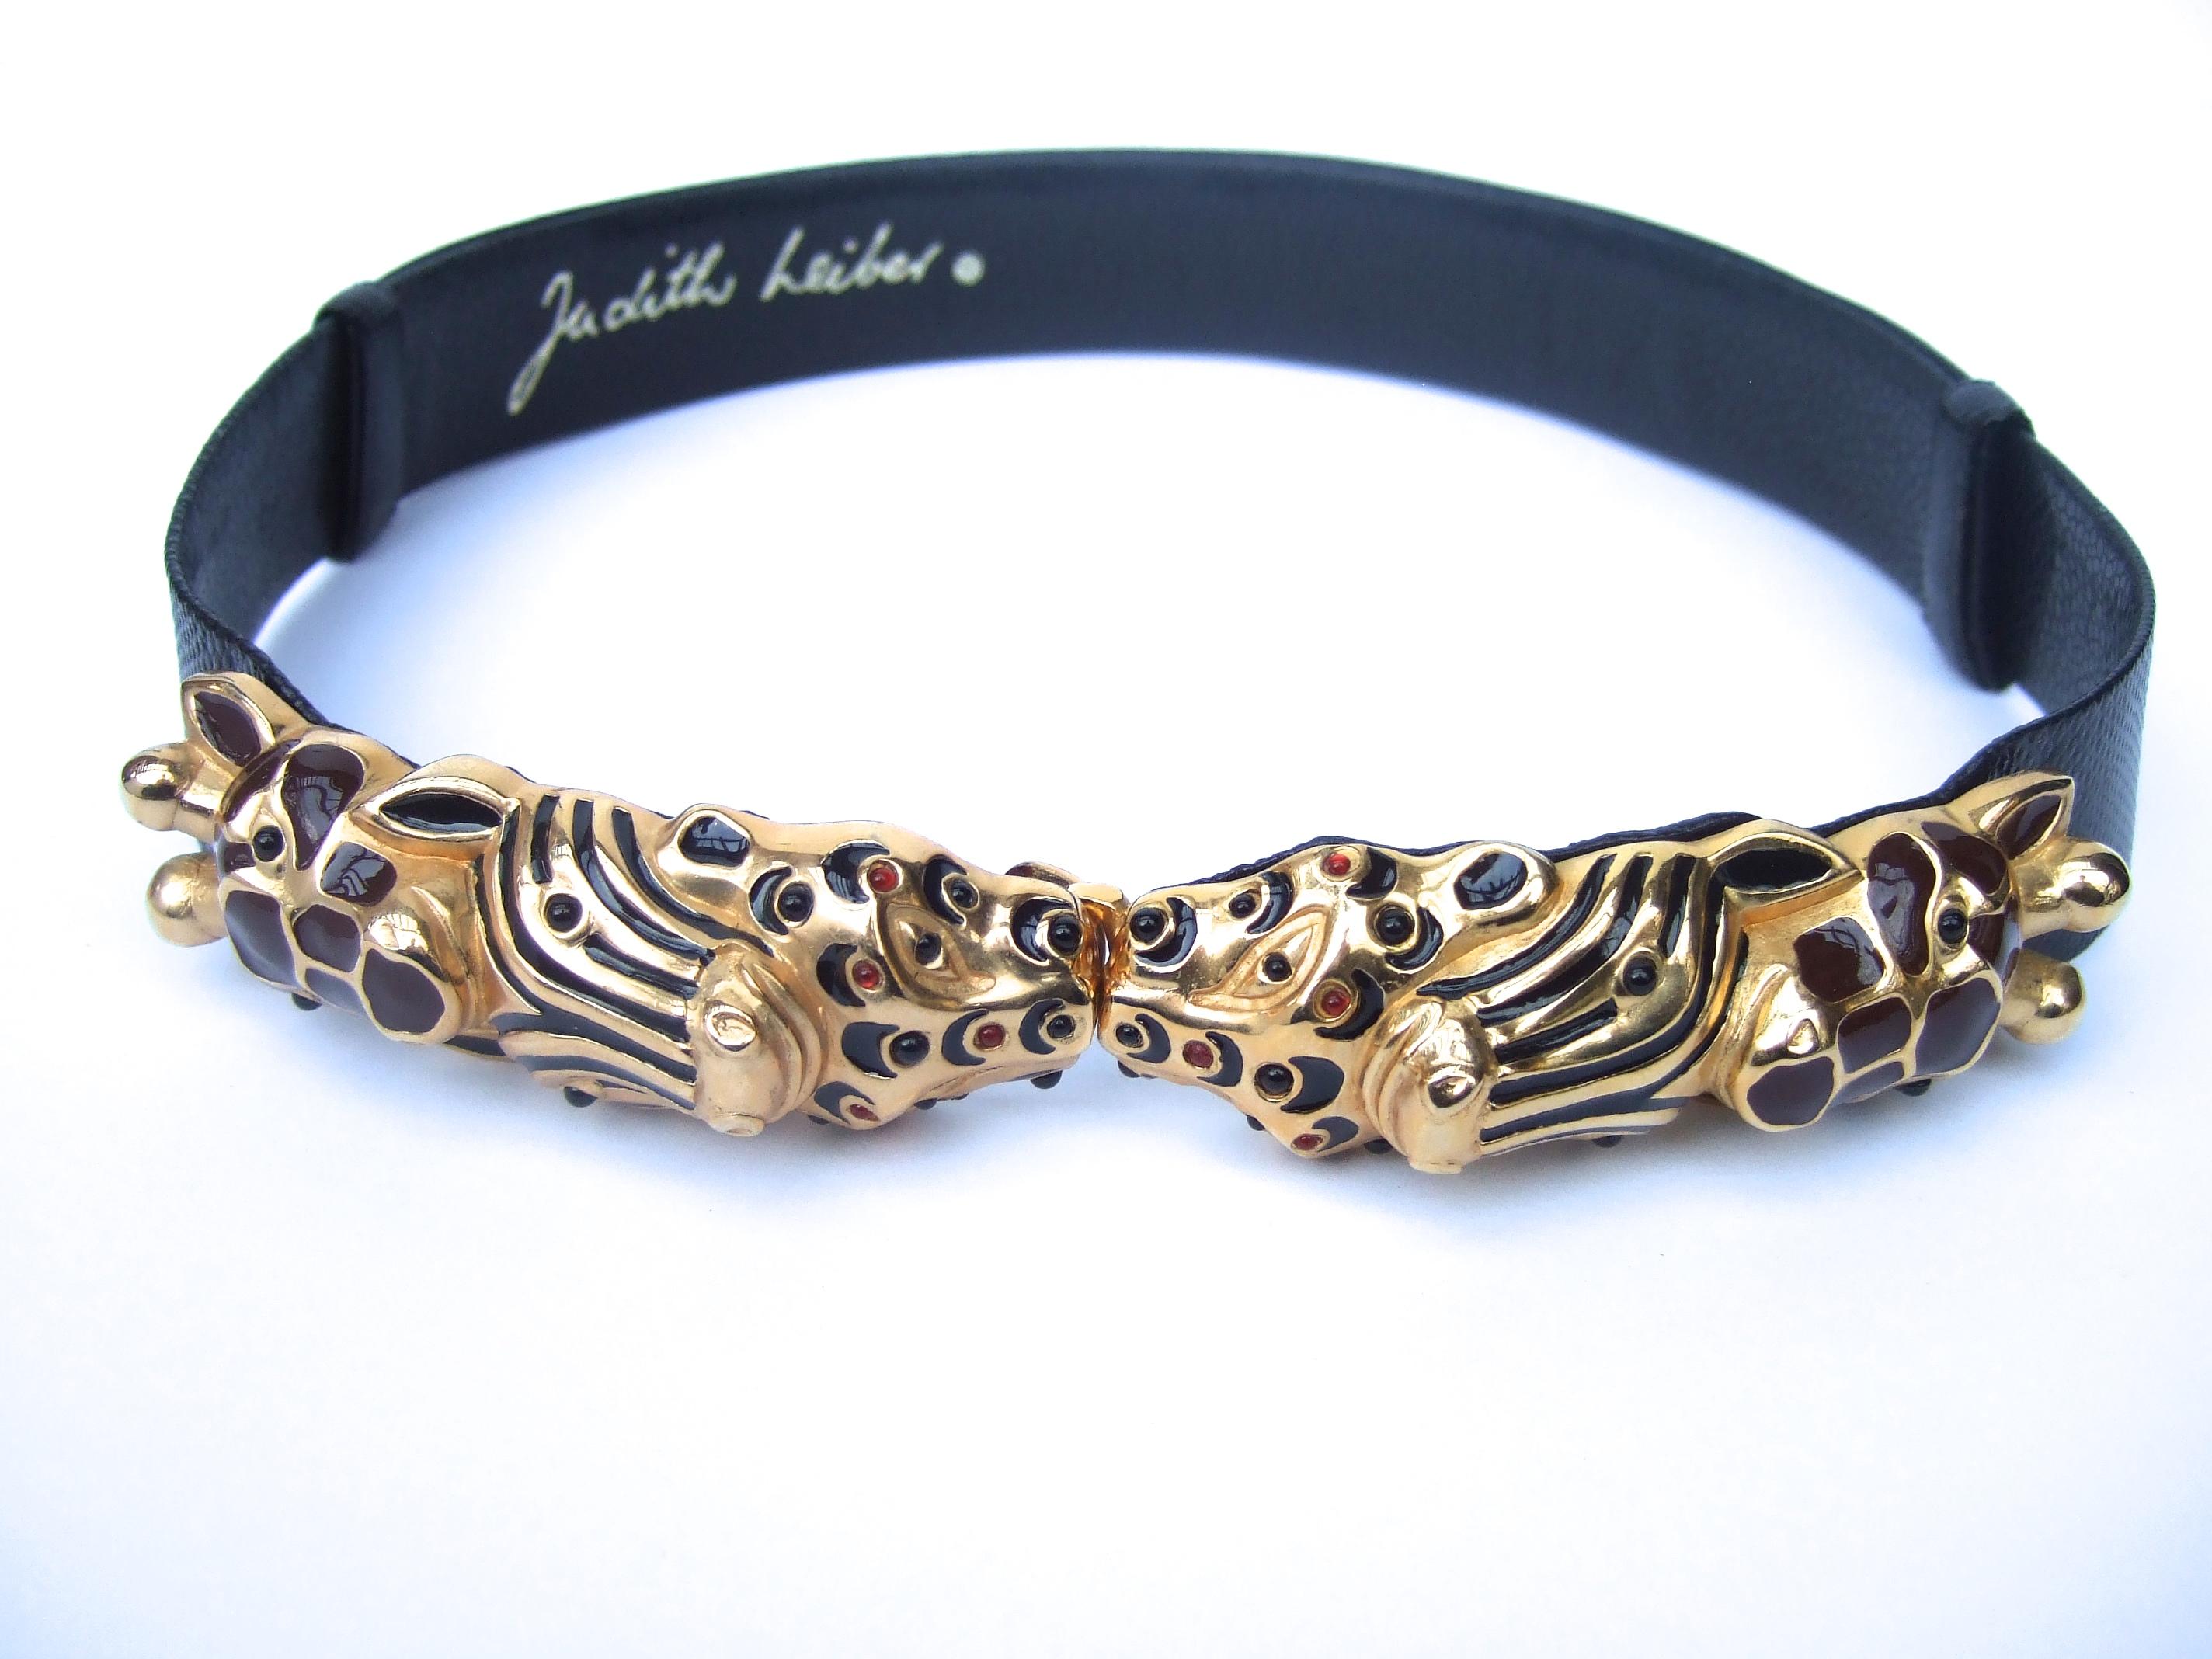 Judith Leiber Glass jeweled jungle animal black leather embossed belt c 1980s

The elegant belt is designed with a collection of exotic jungle animal that serves as the buckle. A panther, zebra & a giraffe

The series of animal heads are sheathed in